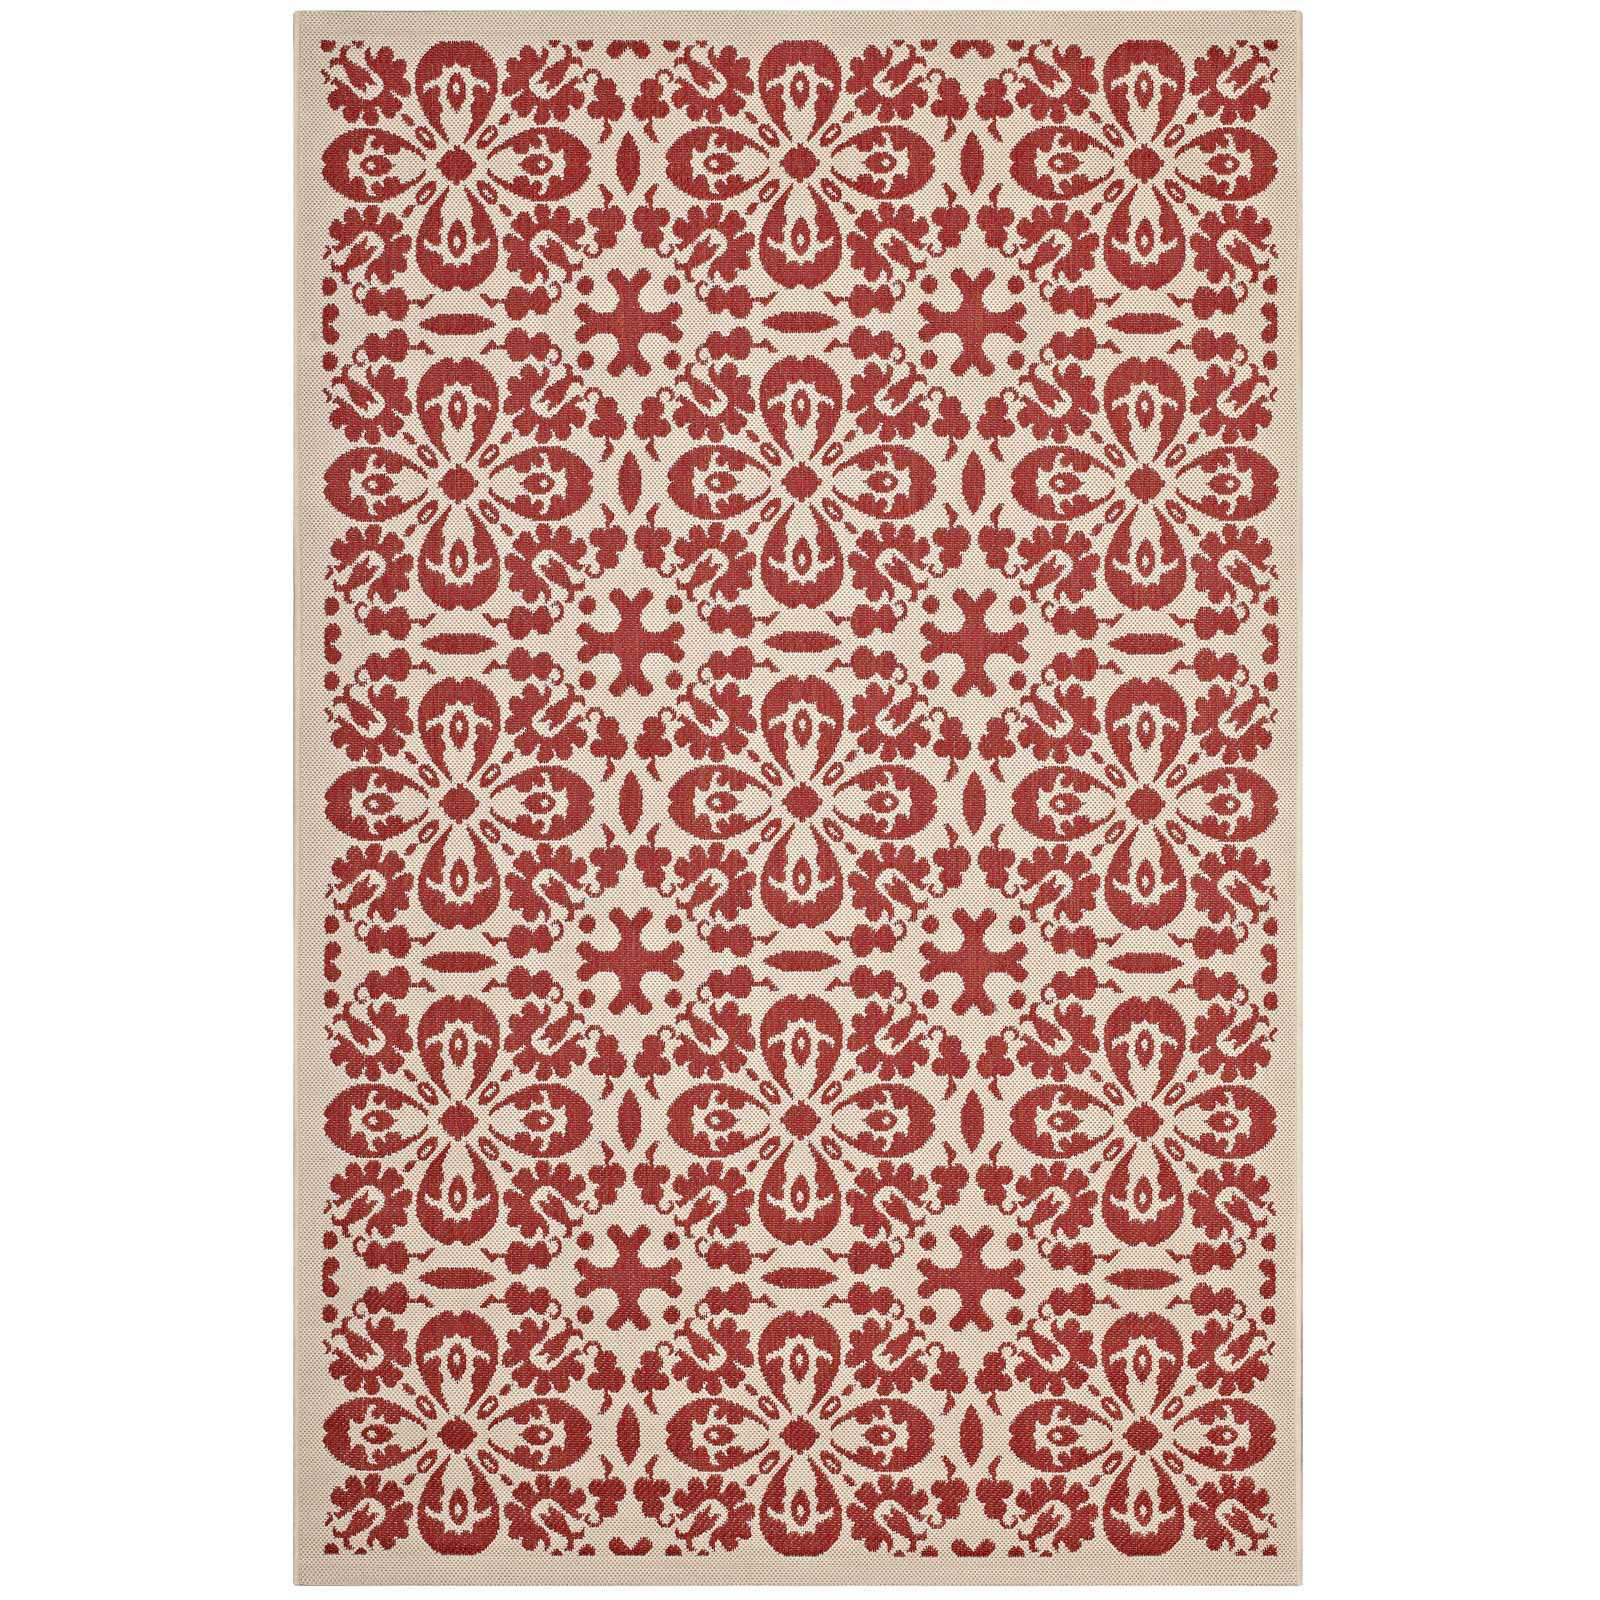 Modway Ariana Vintage Floral Trellis Indoor and Outdoor Area Rug